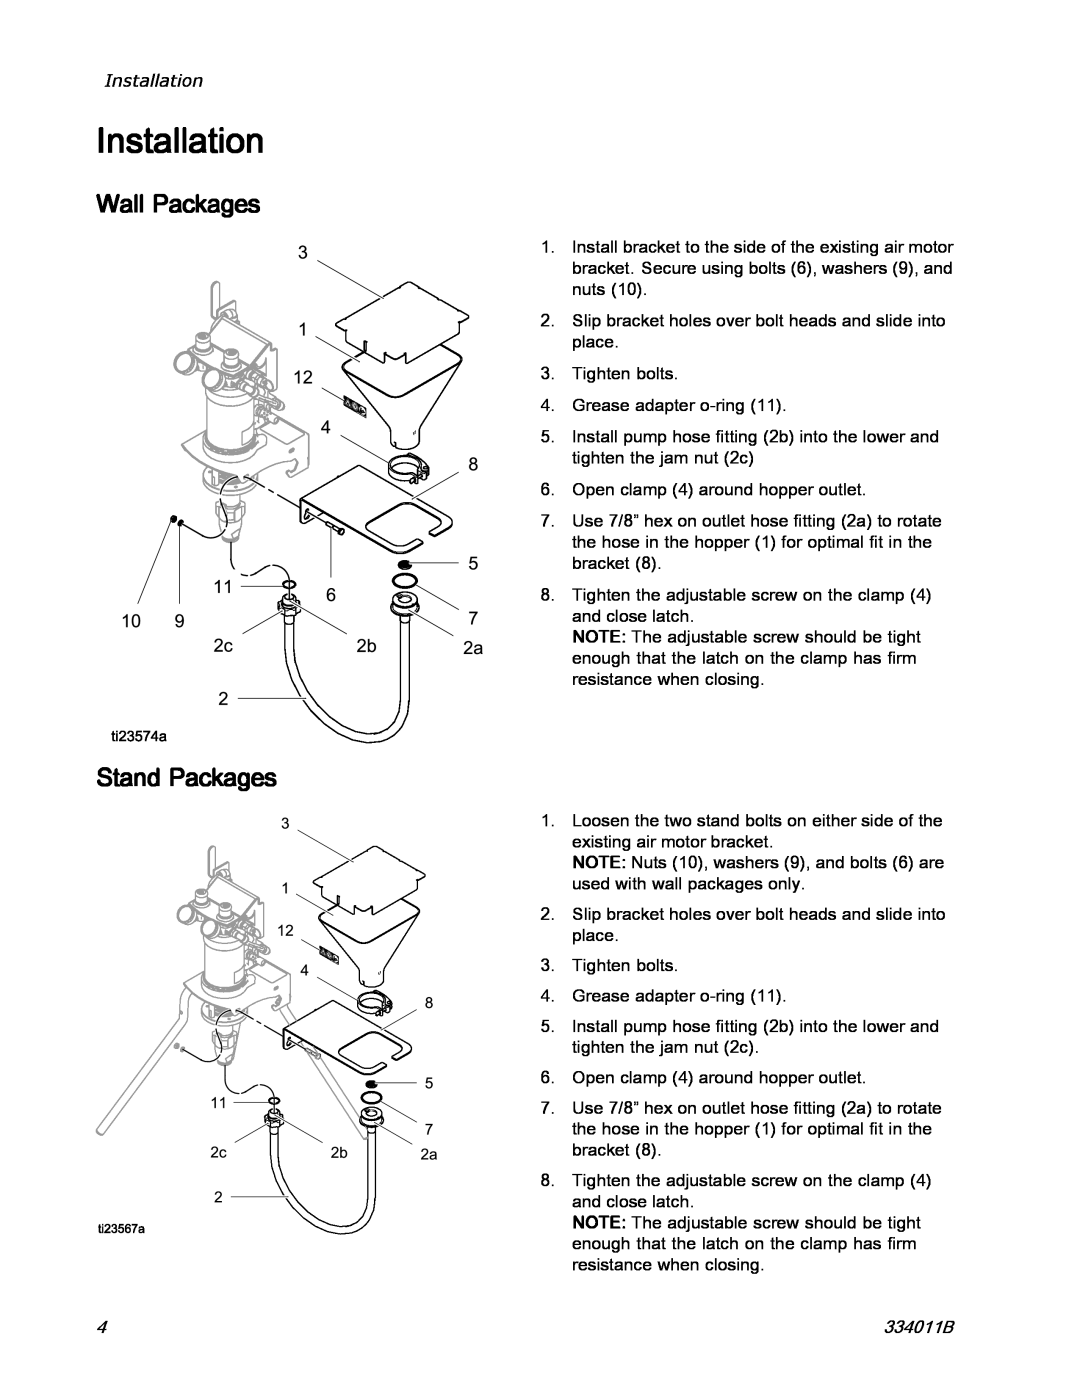 Graco 334011B installation instructions Installation, Wall Packages, Stand Packages 